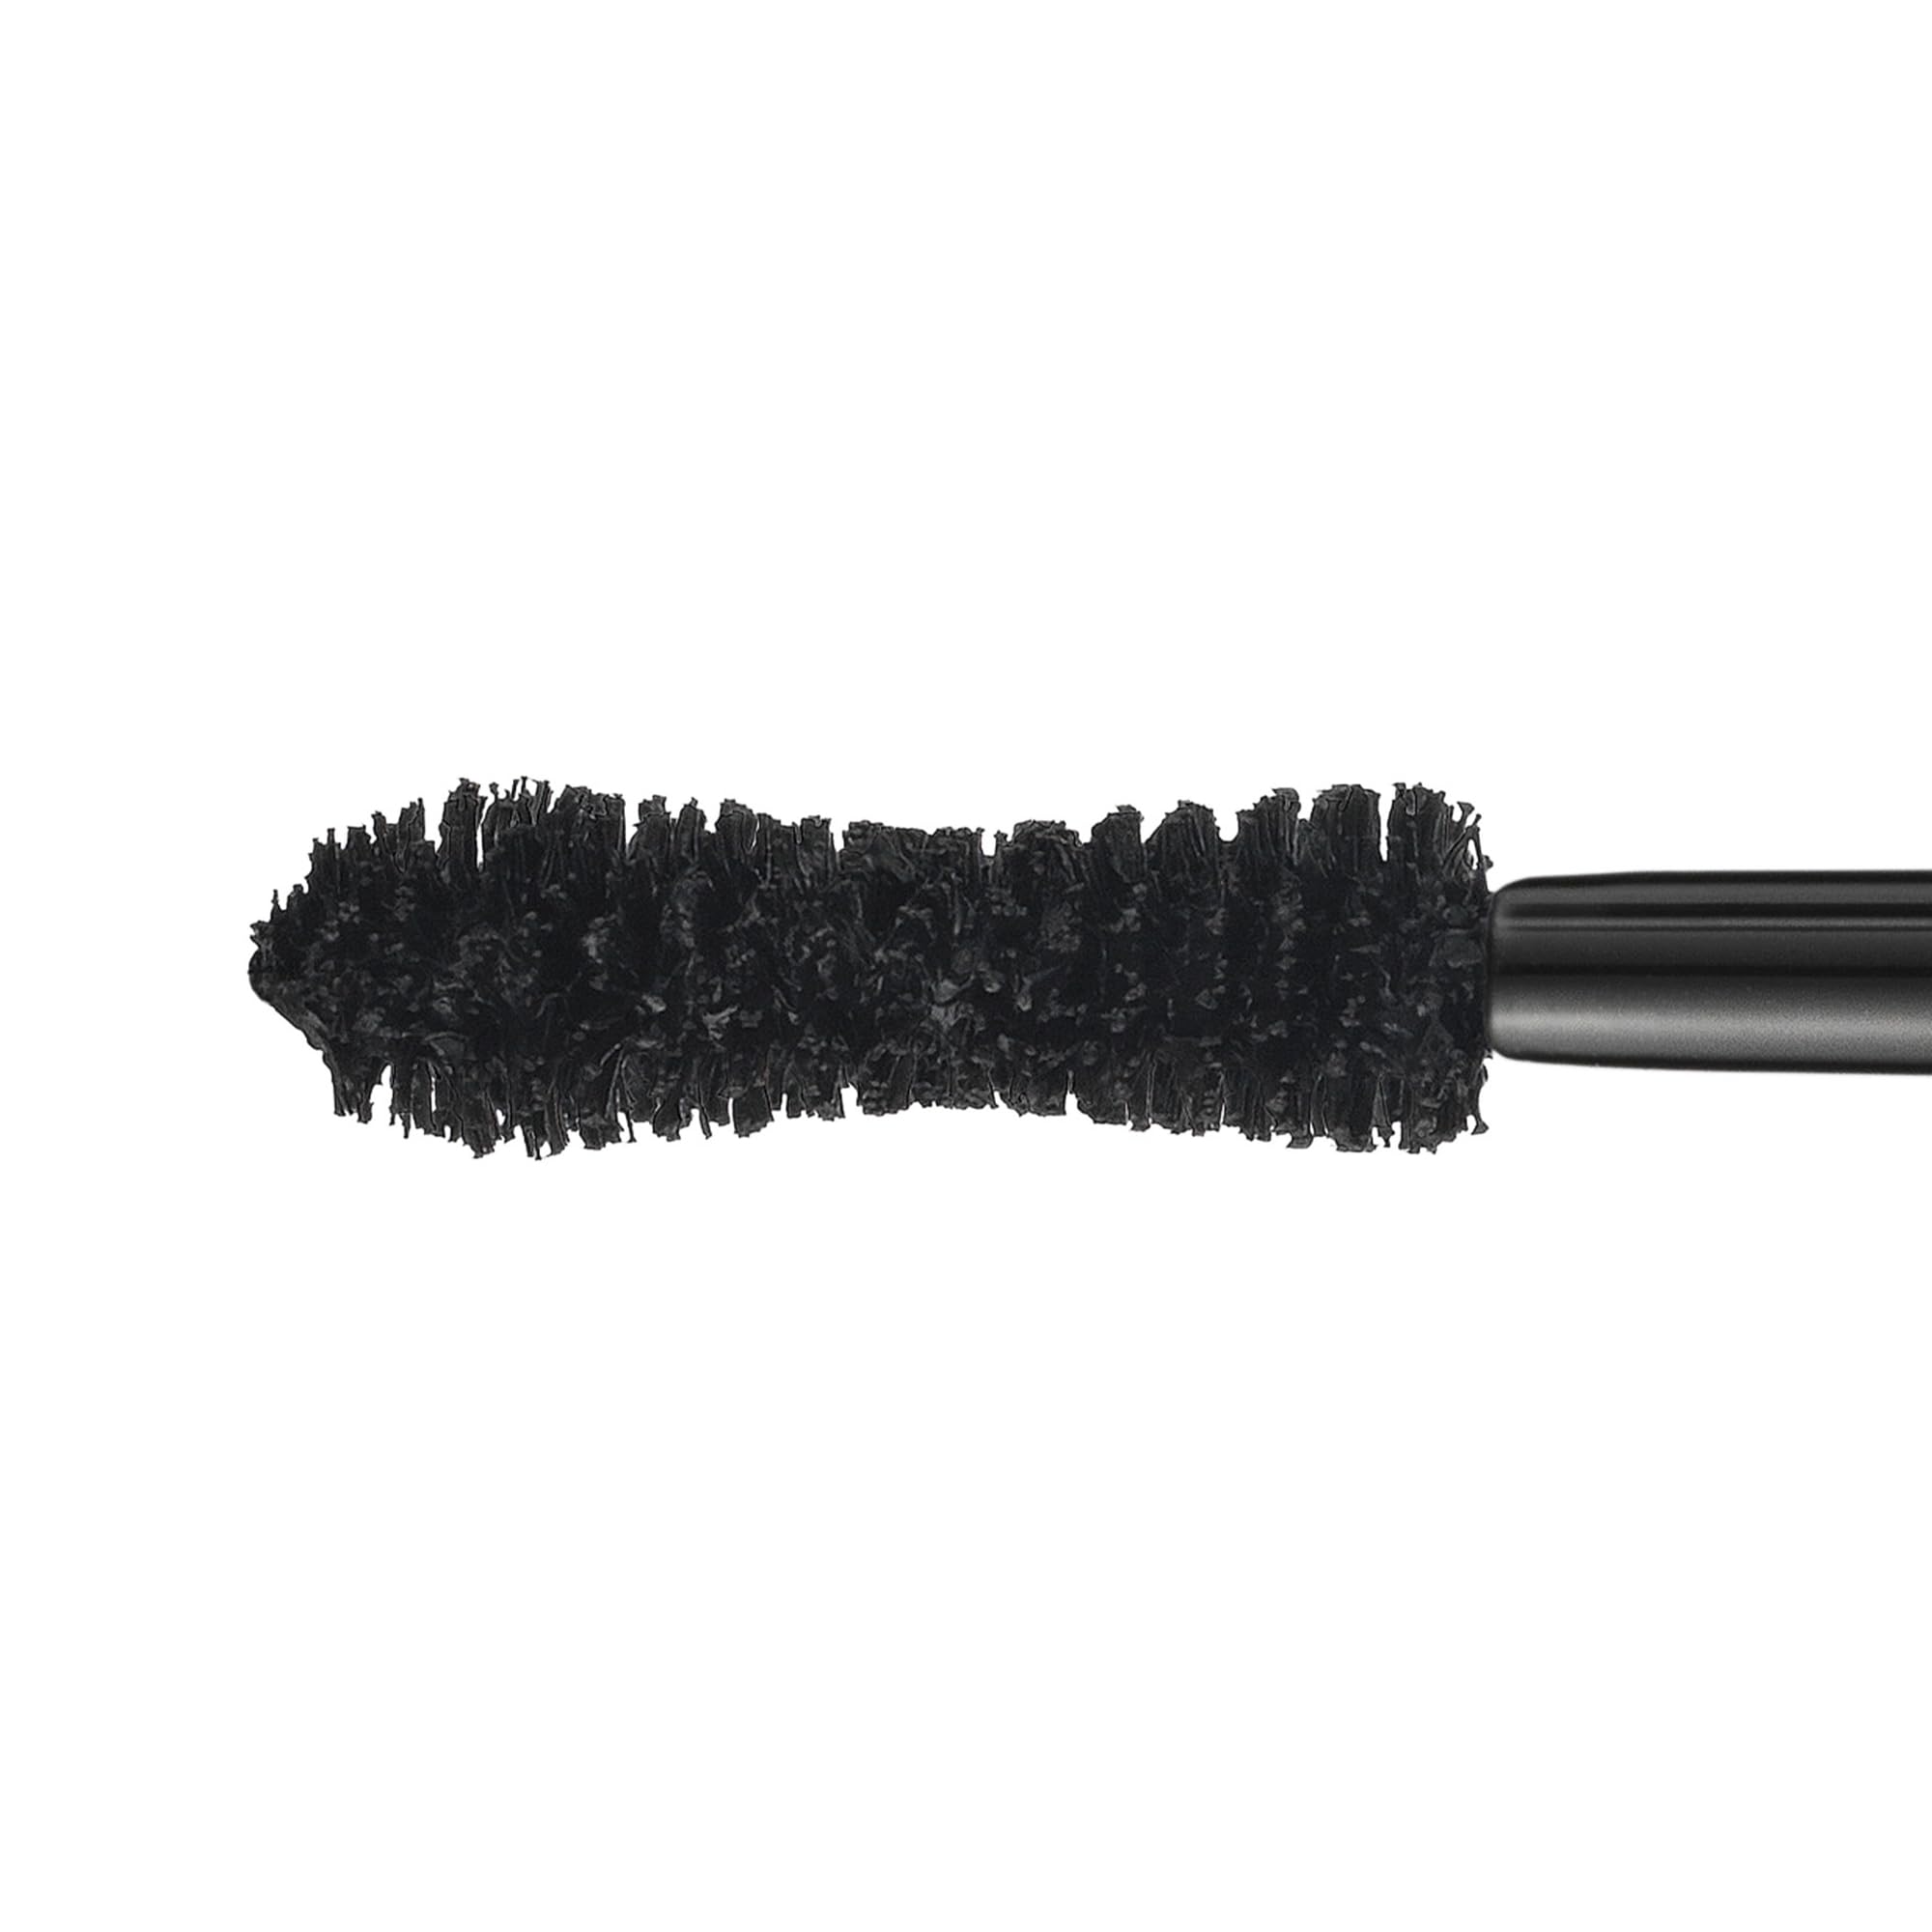 PUPA Milano Vamp! Mascara - For Voluminous And Dramatic Eyelashes - Max Lengthening And Defining Formula Adds Impact - Boost Your Eye Allure With Long, Thick Lashes - 301 Electric Blue - 0.32 Oz